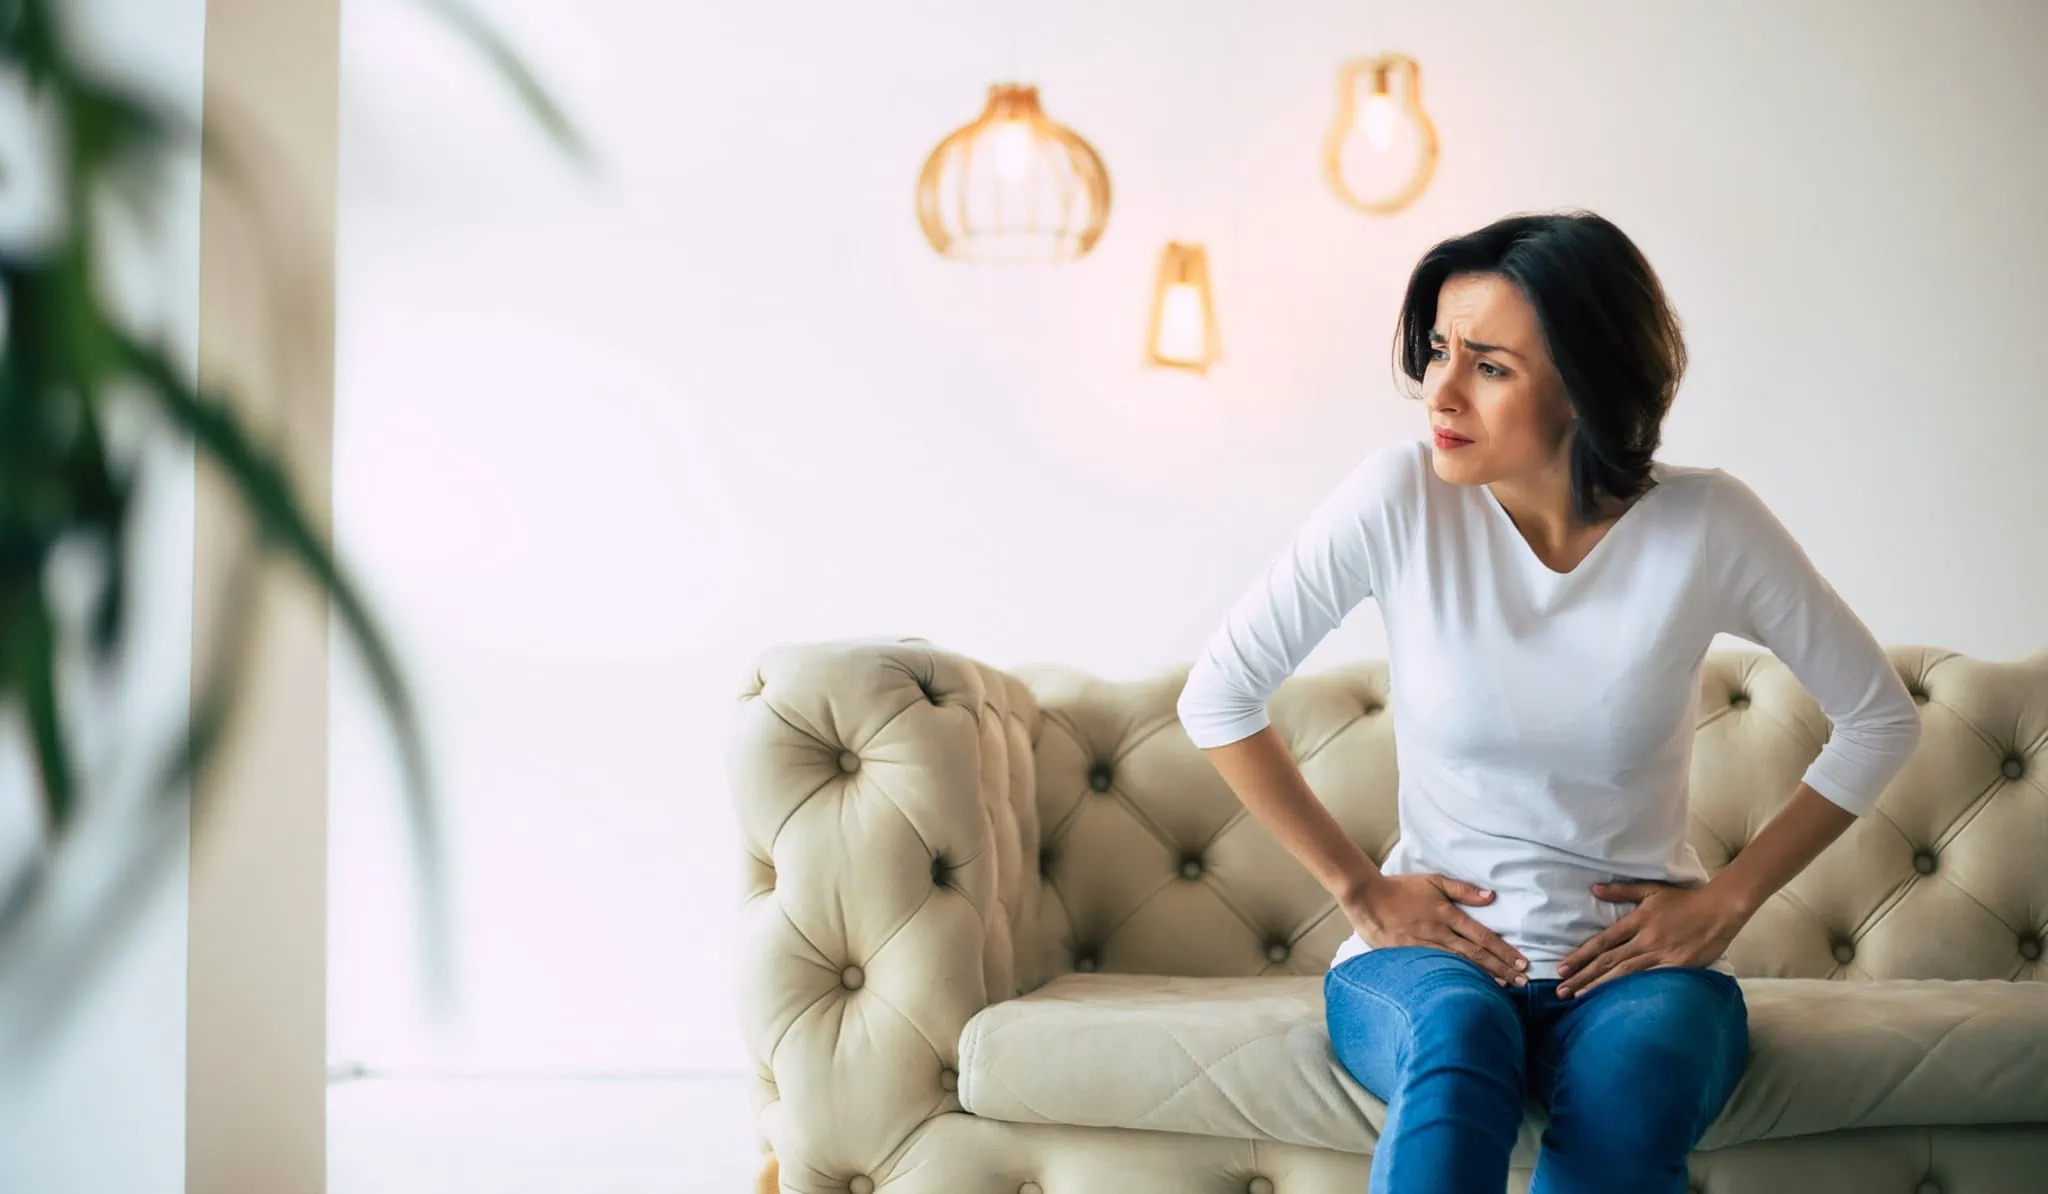 Young woman is sitting on a sofa and touching her lower stomach in discomfort.